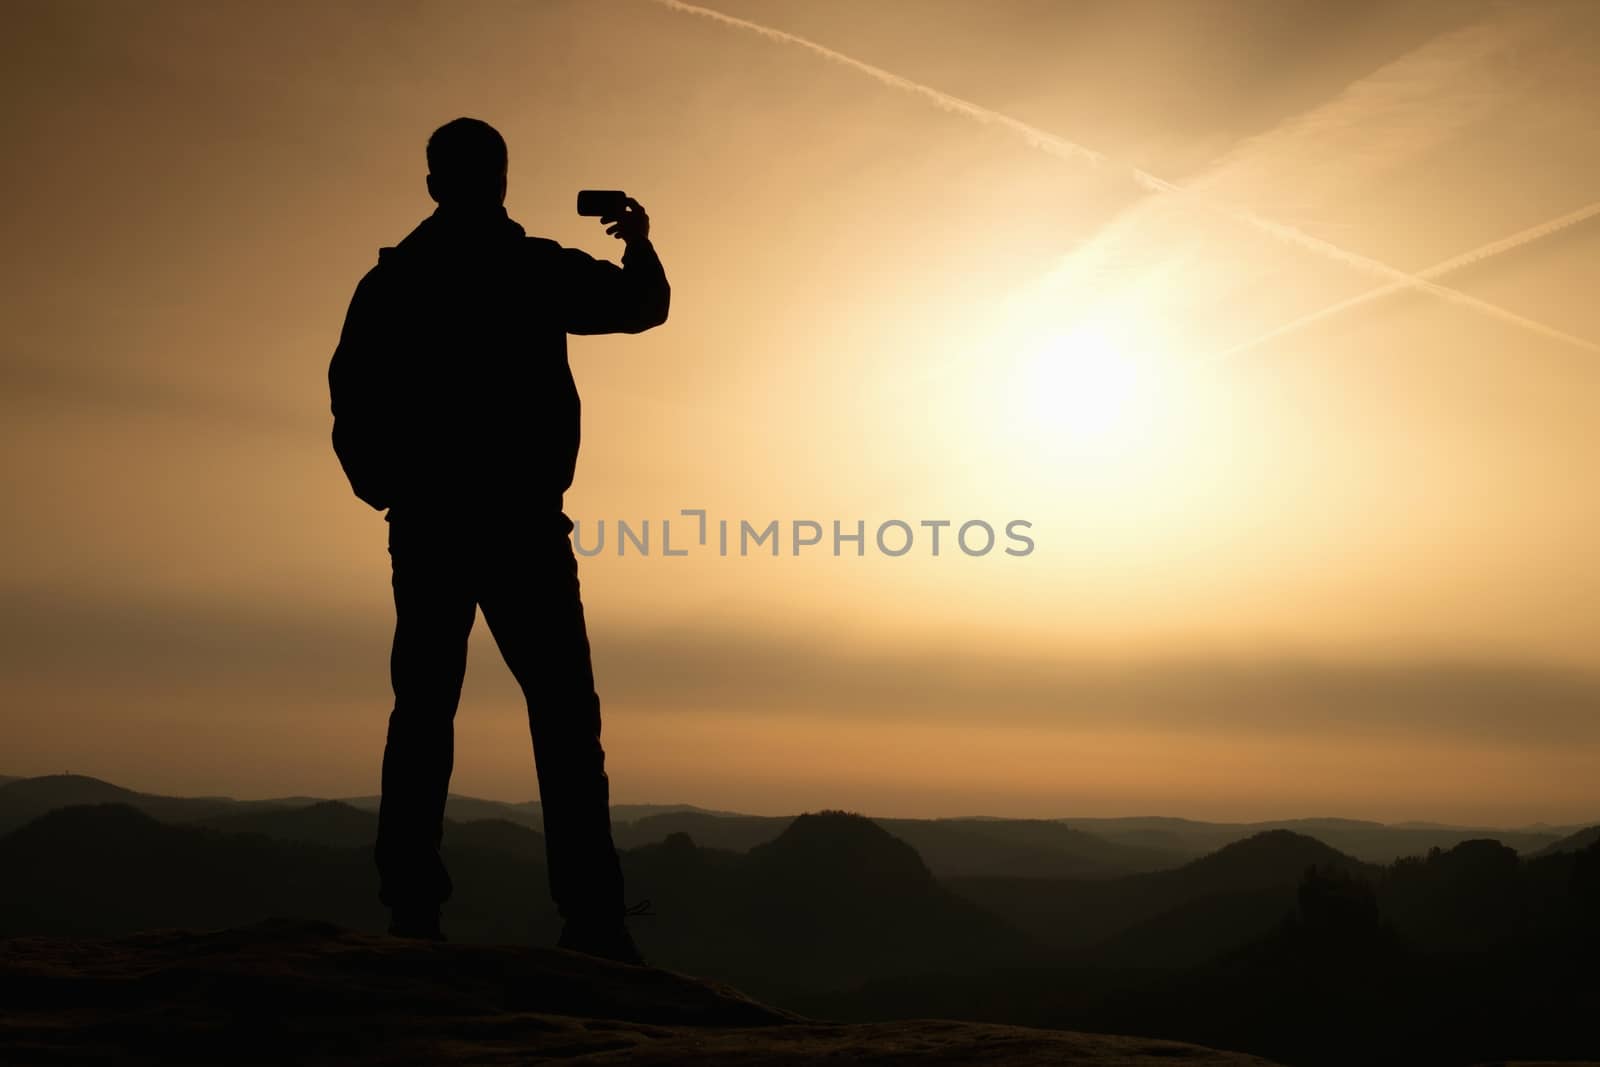 Tourist hold in hand shinning phone and phototograph spring hilly landscape. Misty natuure. Phone photography on the peak of mountain at sunrise.